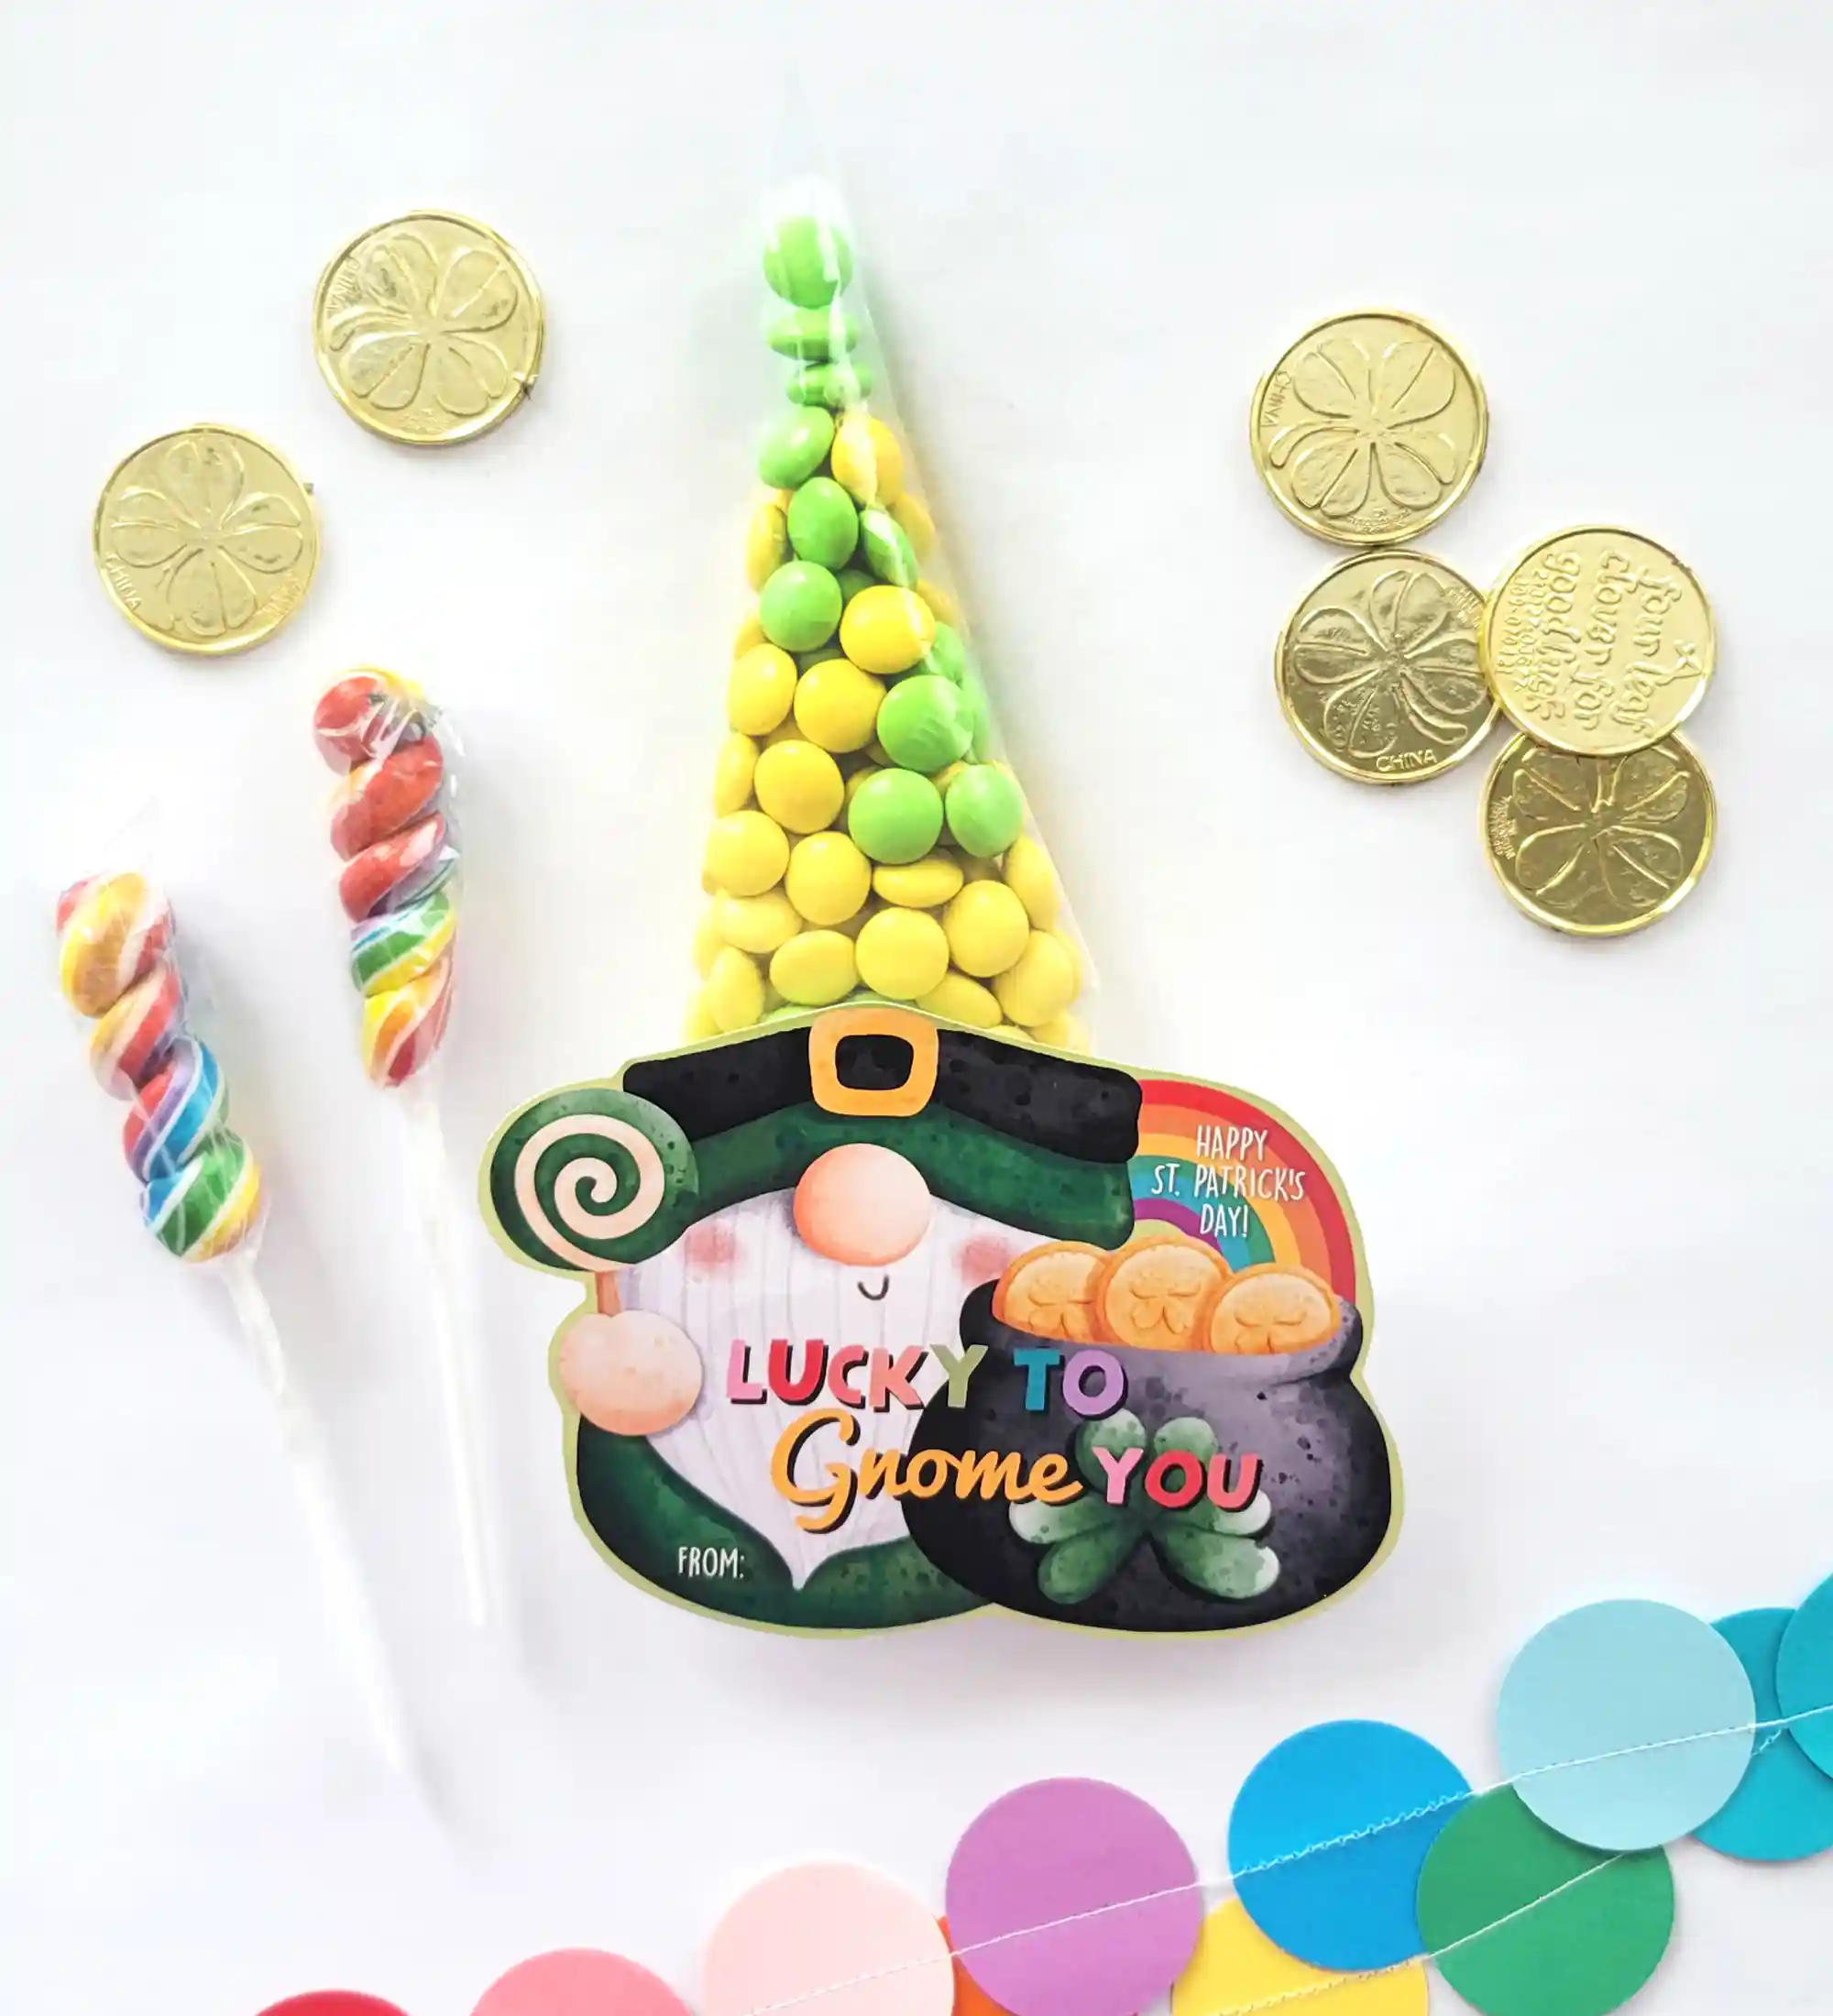 Printable St. Patrick's Day gift tag for a fun and easy gift for St. Patrick's Day. Gfit tag says: "Lucky to Gnome You. Happy St. Patrick's Day!!" Attach gift tag to a small bag of St. Patrick's Day treats like M&Ms, skittles, etc. to make the gnome's hat or a bag of chocolate coins.